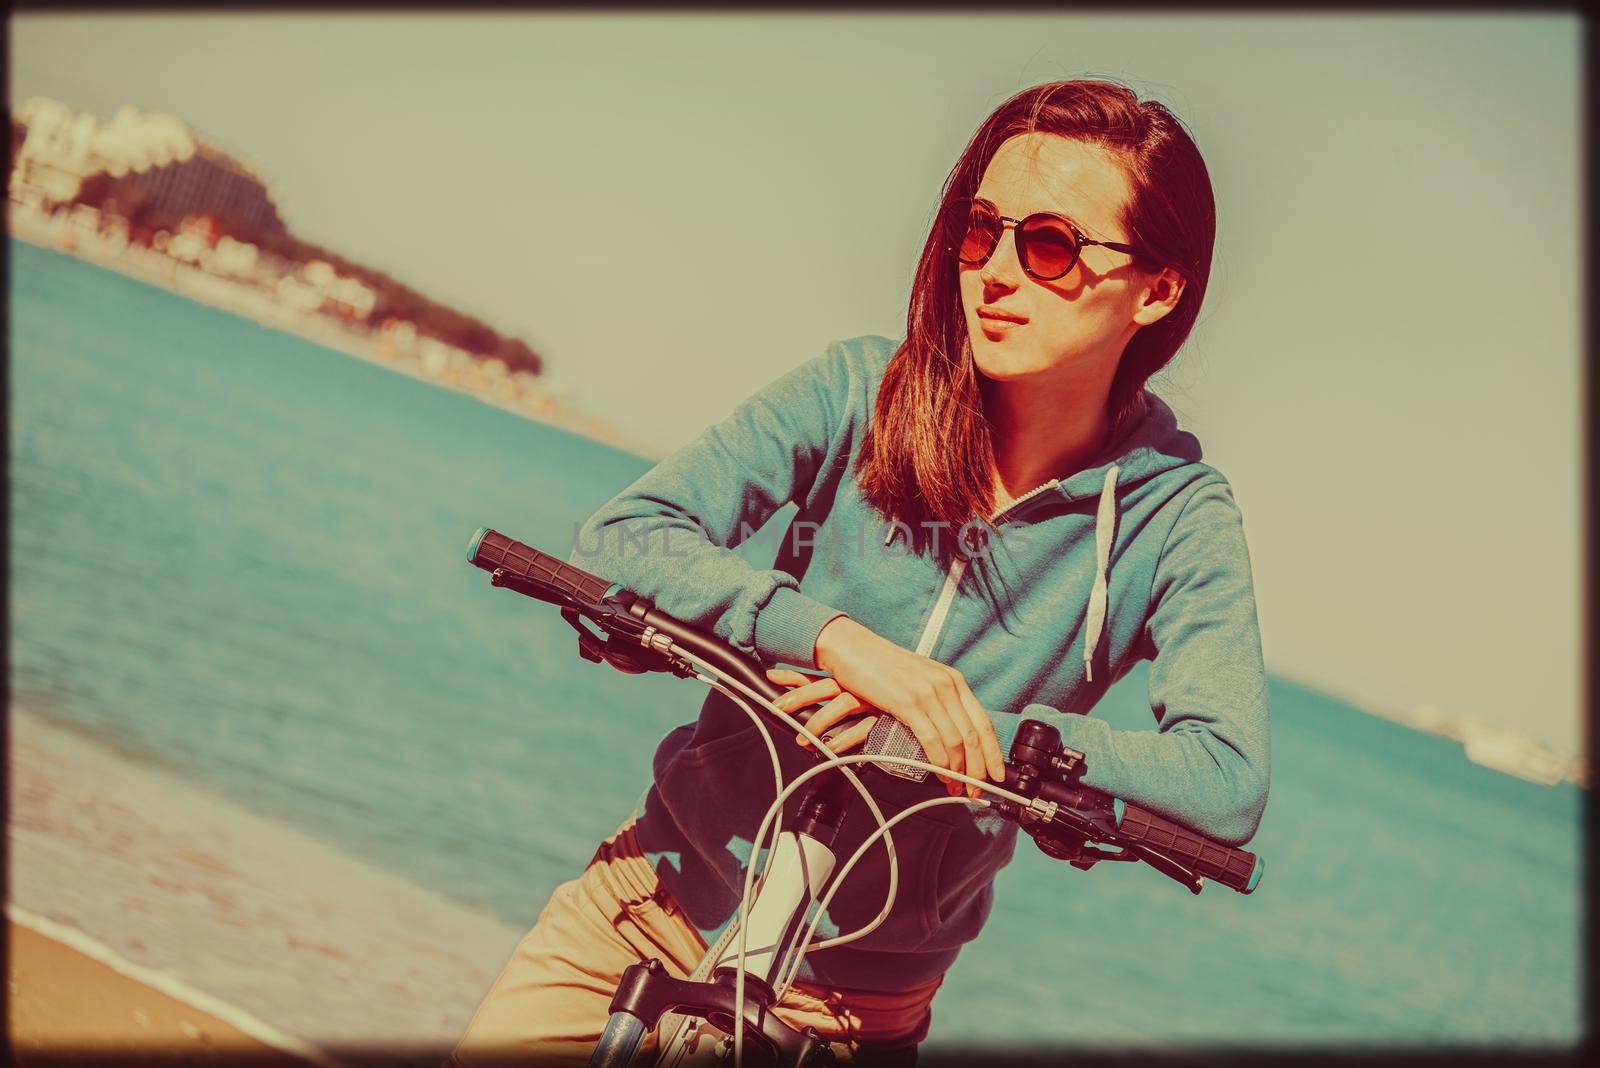 Smiling beautiful young woman with a bicycle on beach in summer. Image with vintage color effect and rectangular frame